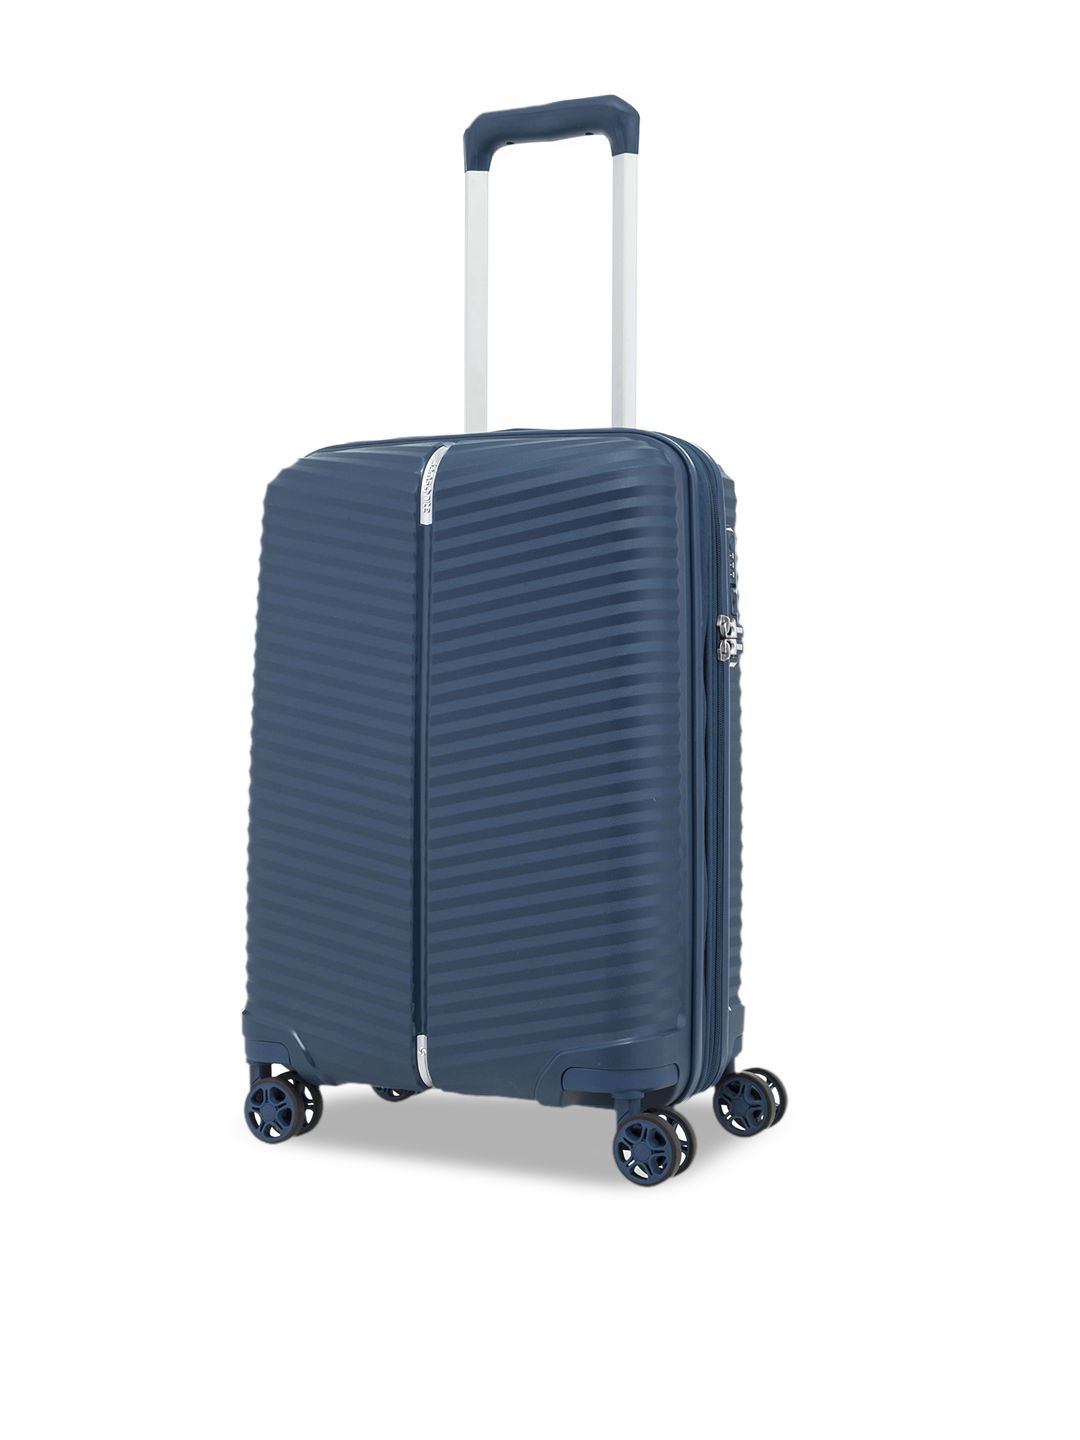 Samsonite Blue Solid Hard-Sided Cabin Trolley Bag Price in India